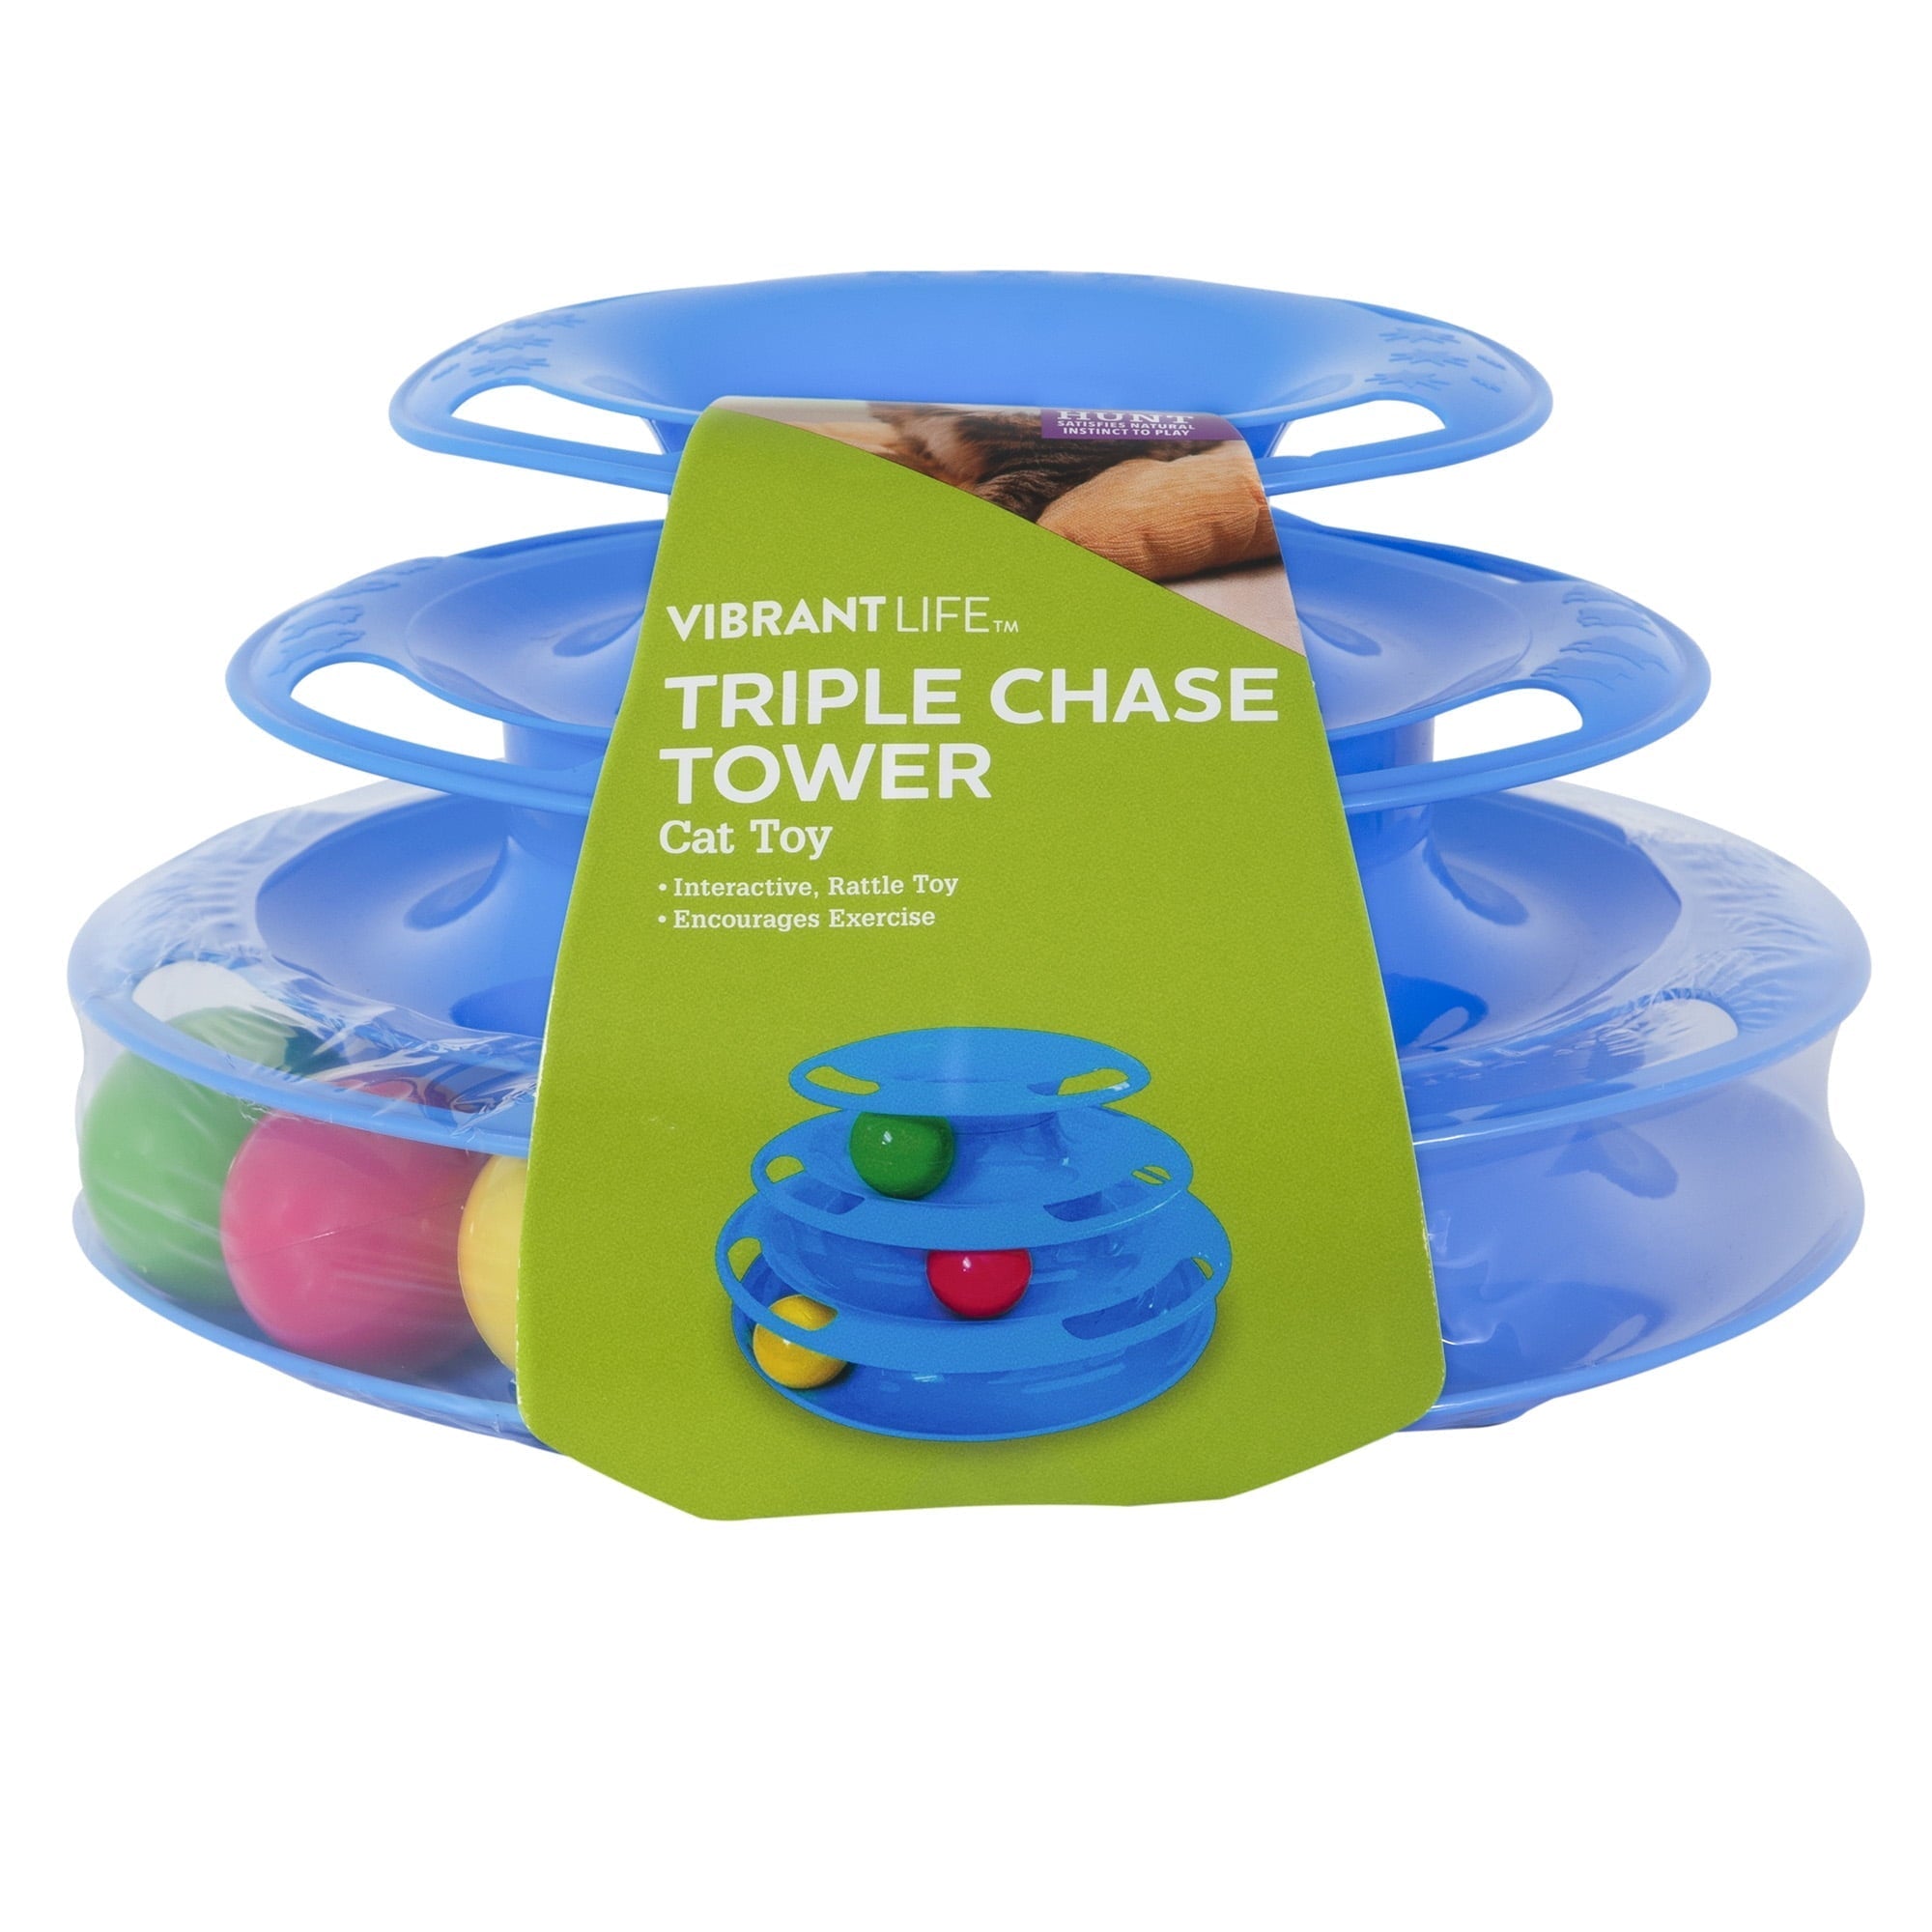 Wholesale prices with free shipping all over United States Vibrant Life Triple Chase 3 Tier Tower Interactive Ball Toy for Cats and Kittens - Steven Deals